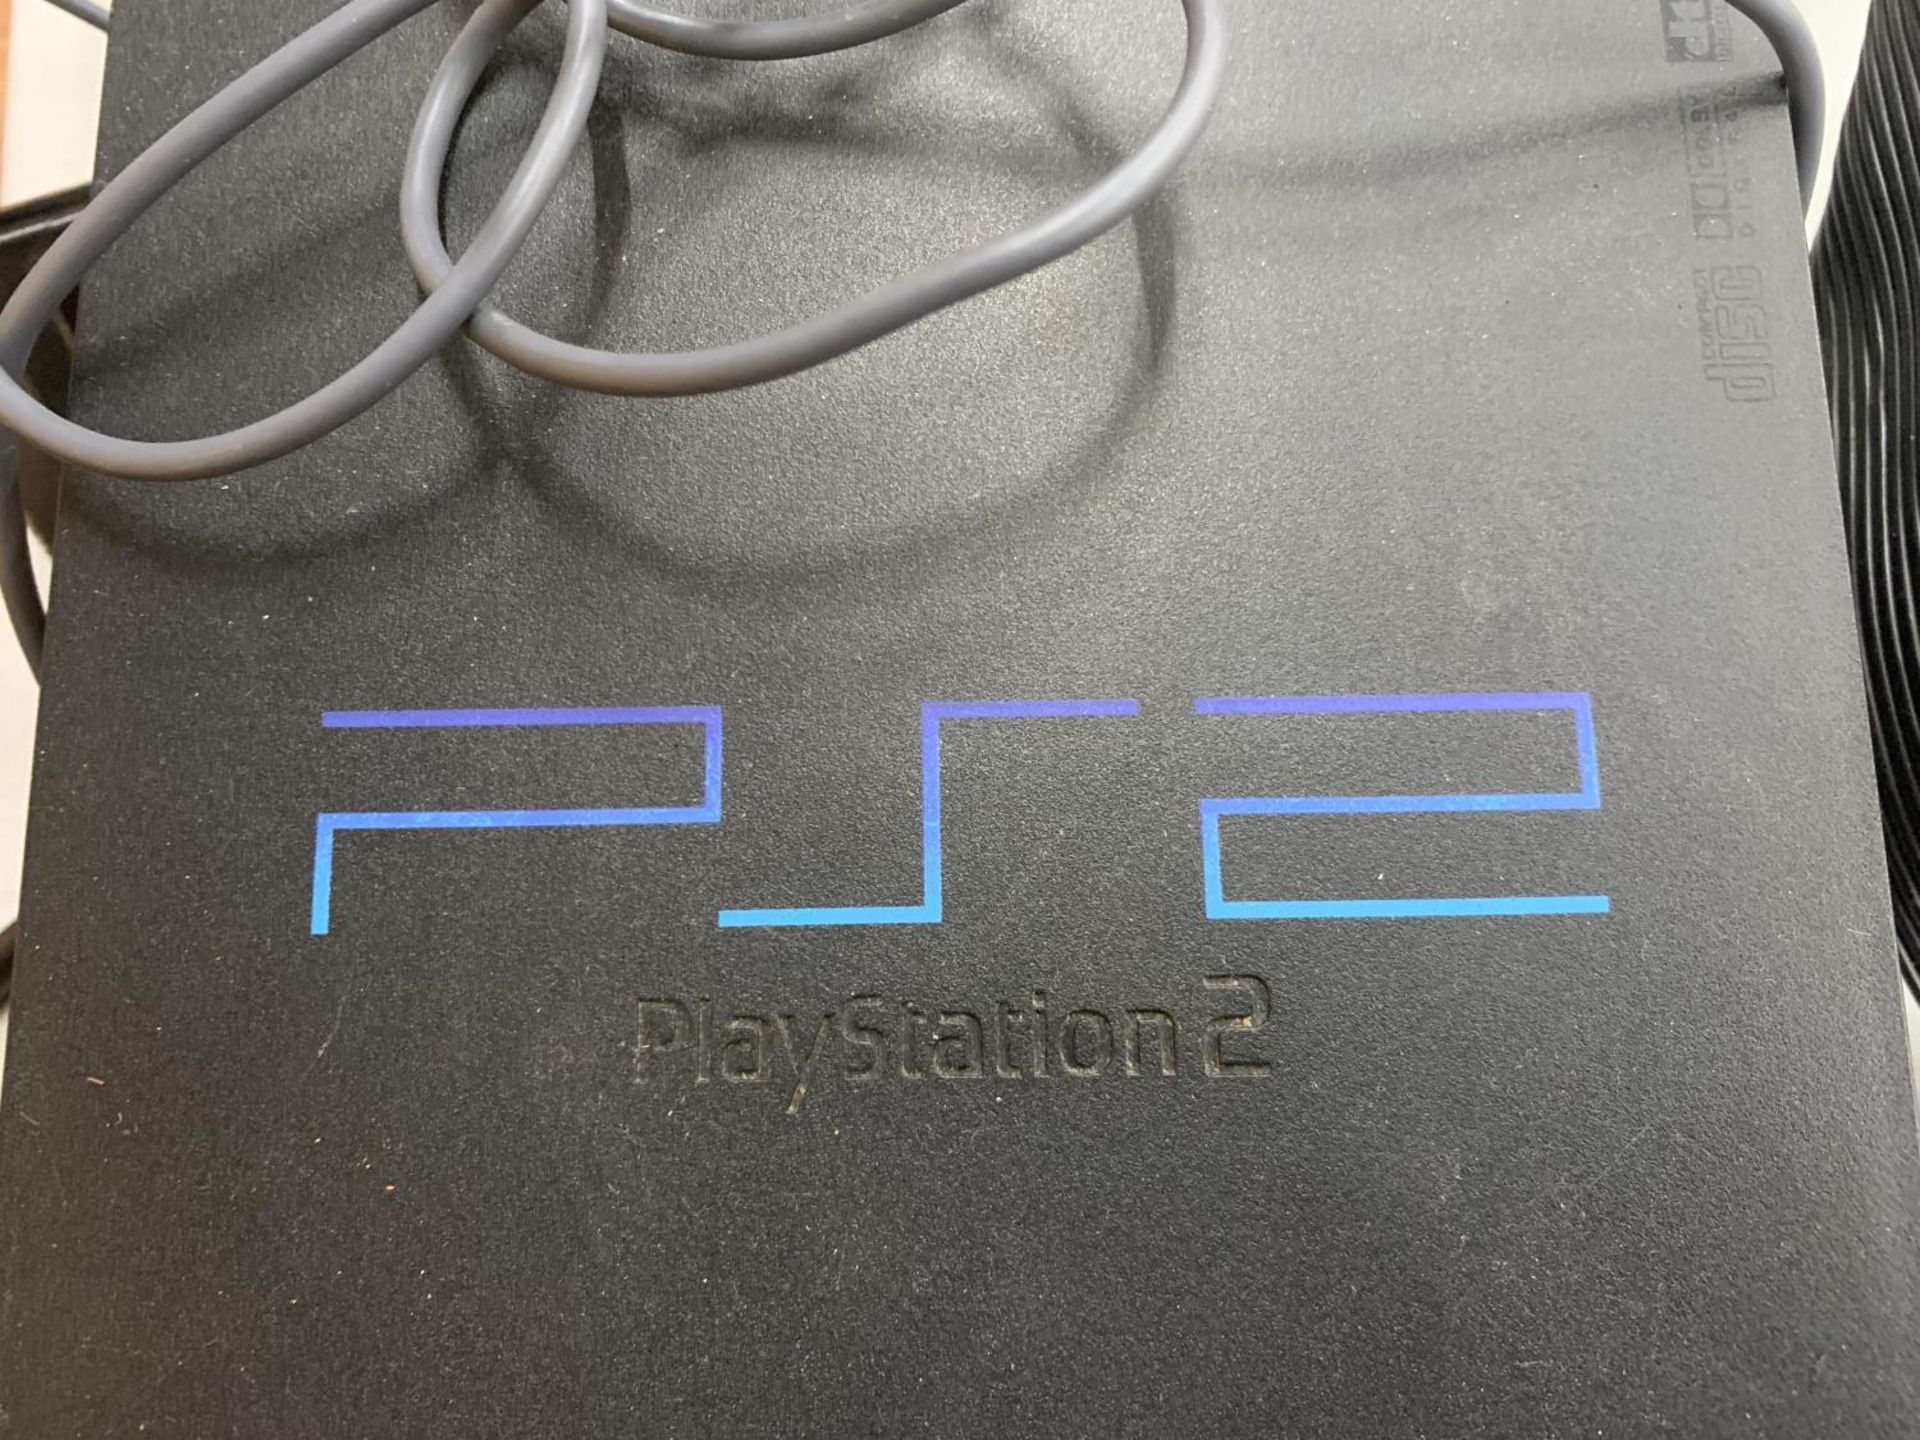 A SONY PLAYSTATION 2 WITH MICROSOFT MOUSE - Bild 2 aus 2